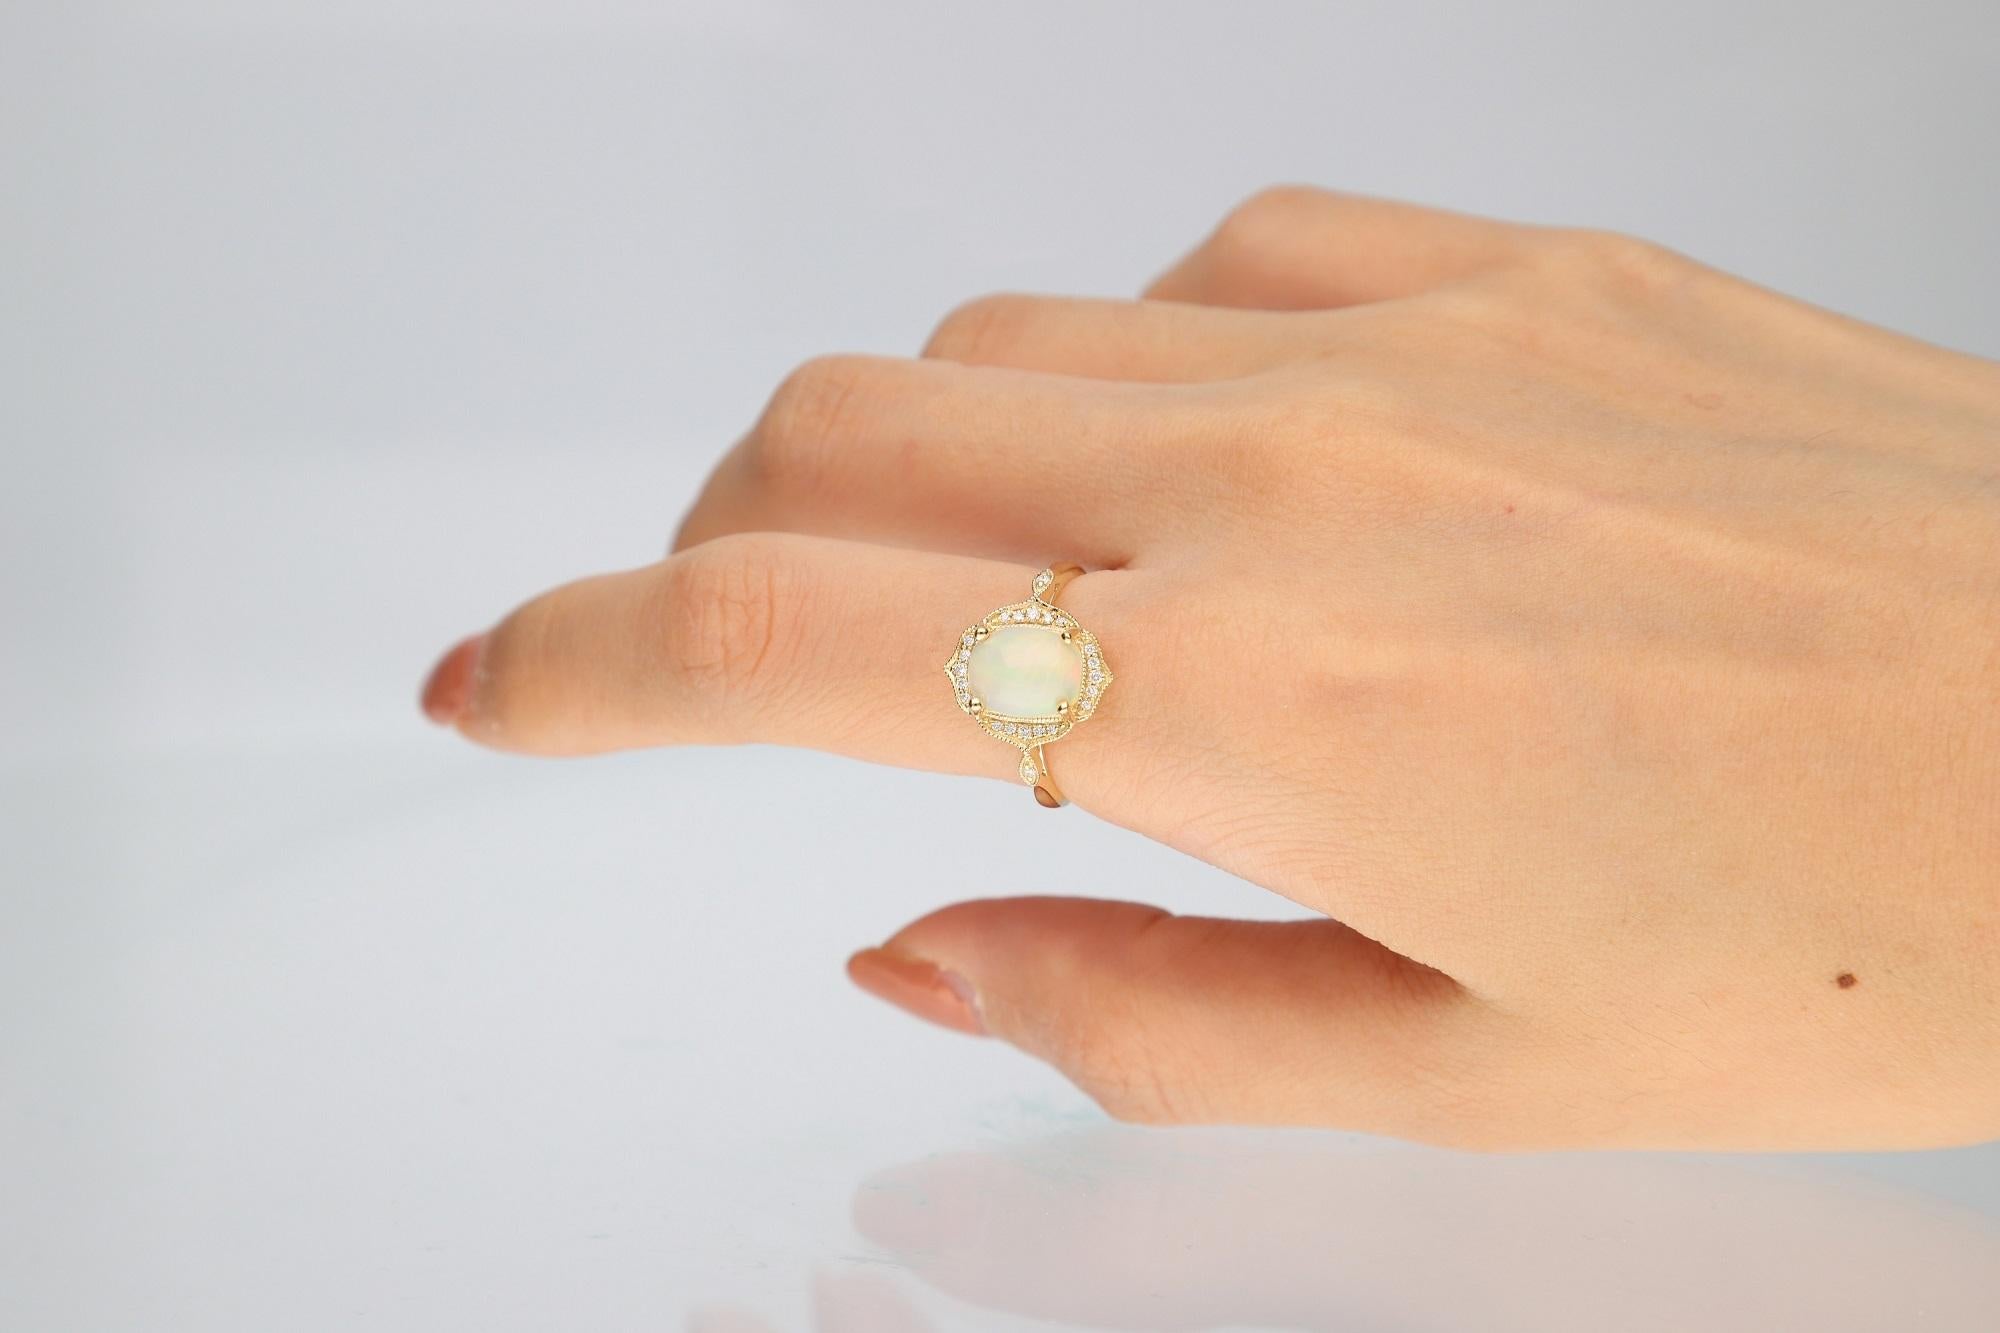 Stunning, timeless and classy eternity Unique ring. Decorate yourself in luxury with this Gin & Grace ring. This ring is made up of 9x7 MM Cushion-cut Prong Setting Ethiopian Opal (1pcs) 1.37 Carat and Round-Cut Prong Setting Diamond (22pcs) 0.09